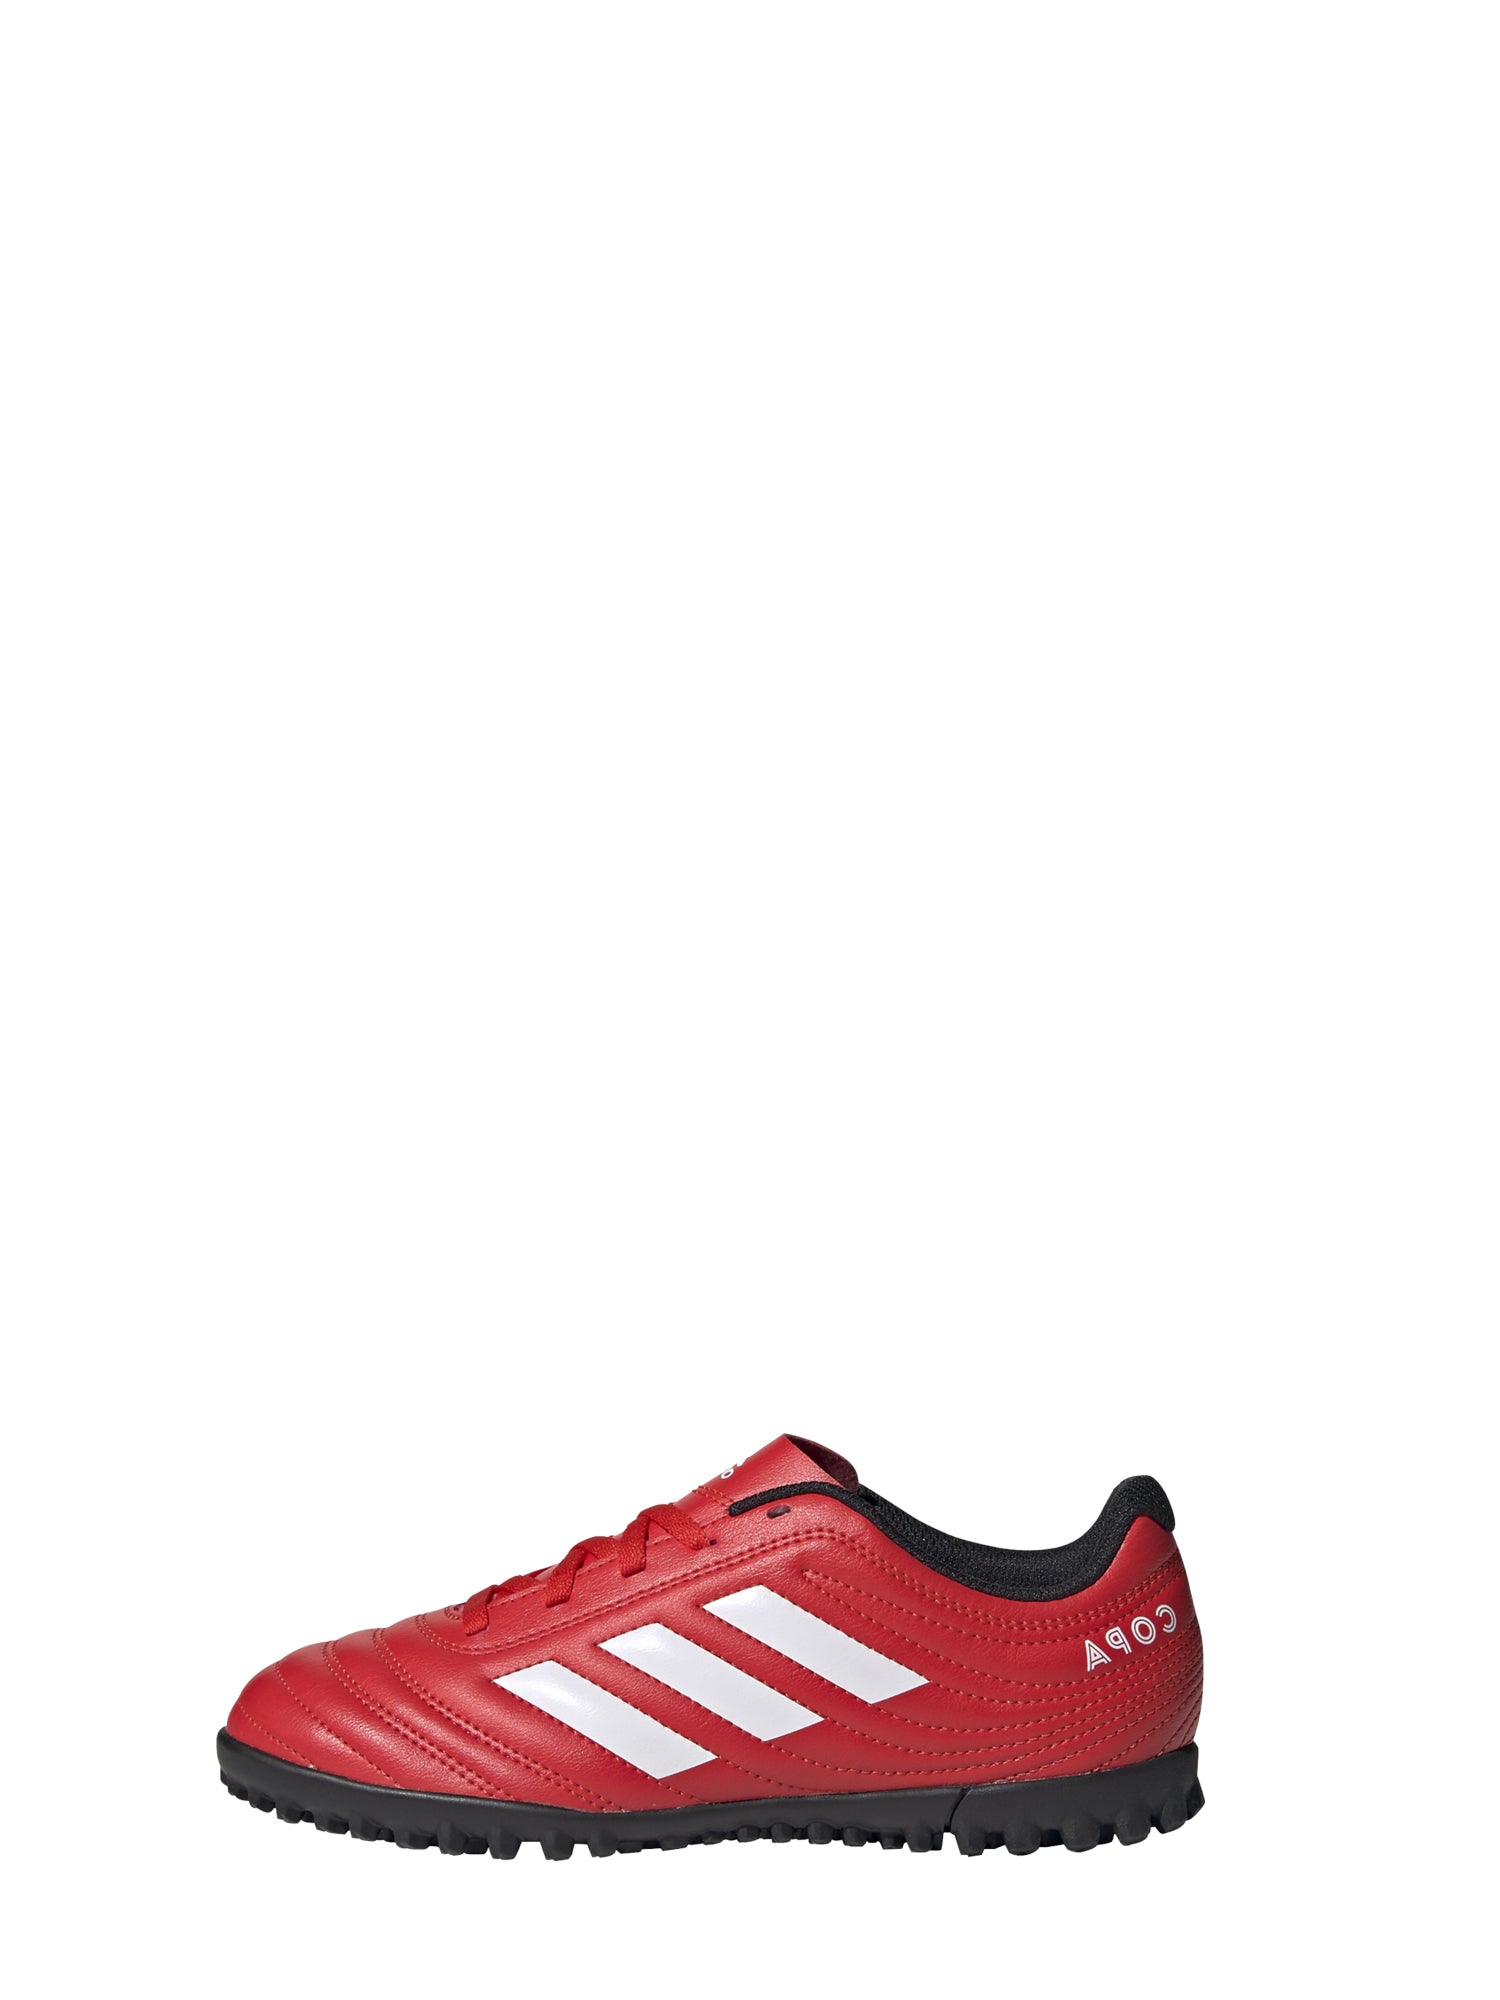 COPA 20.4 TURF SHOES